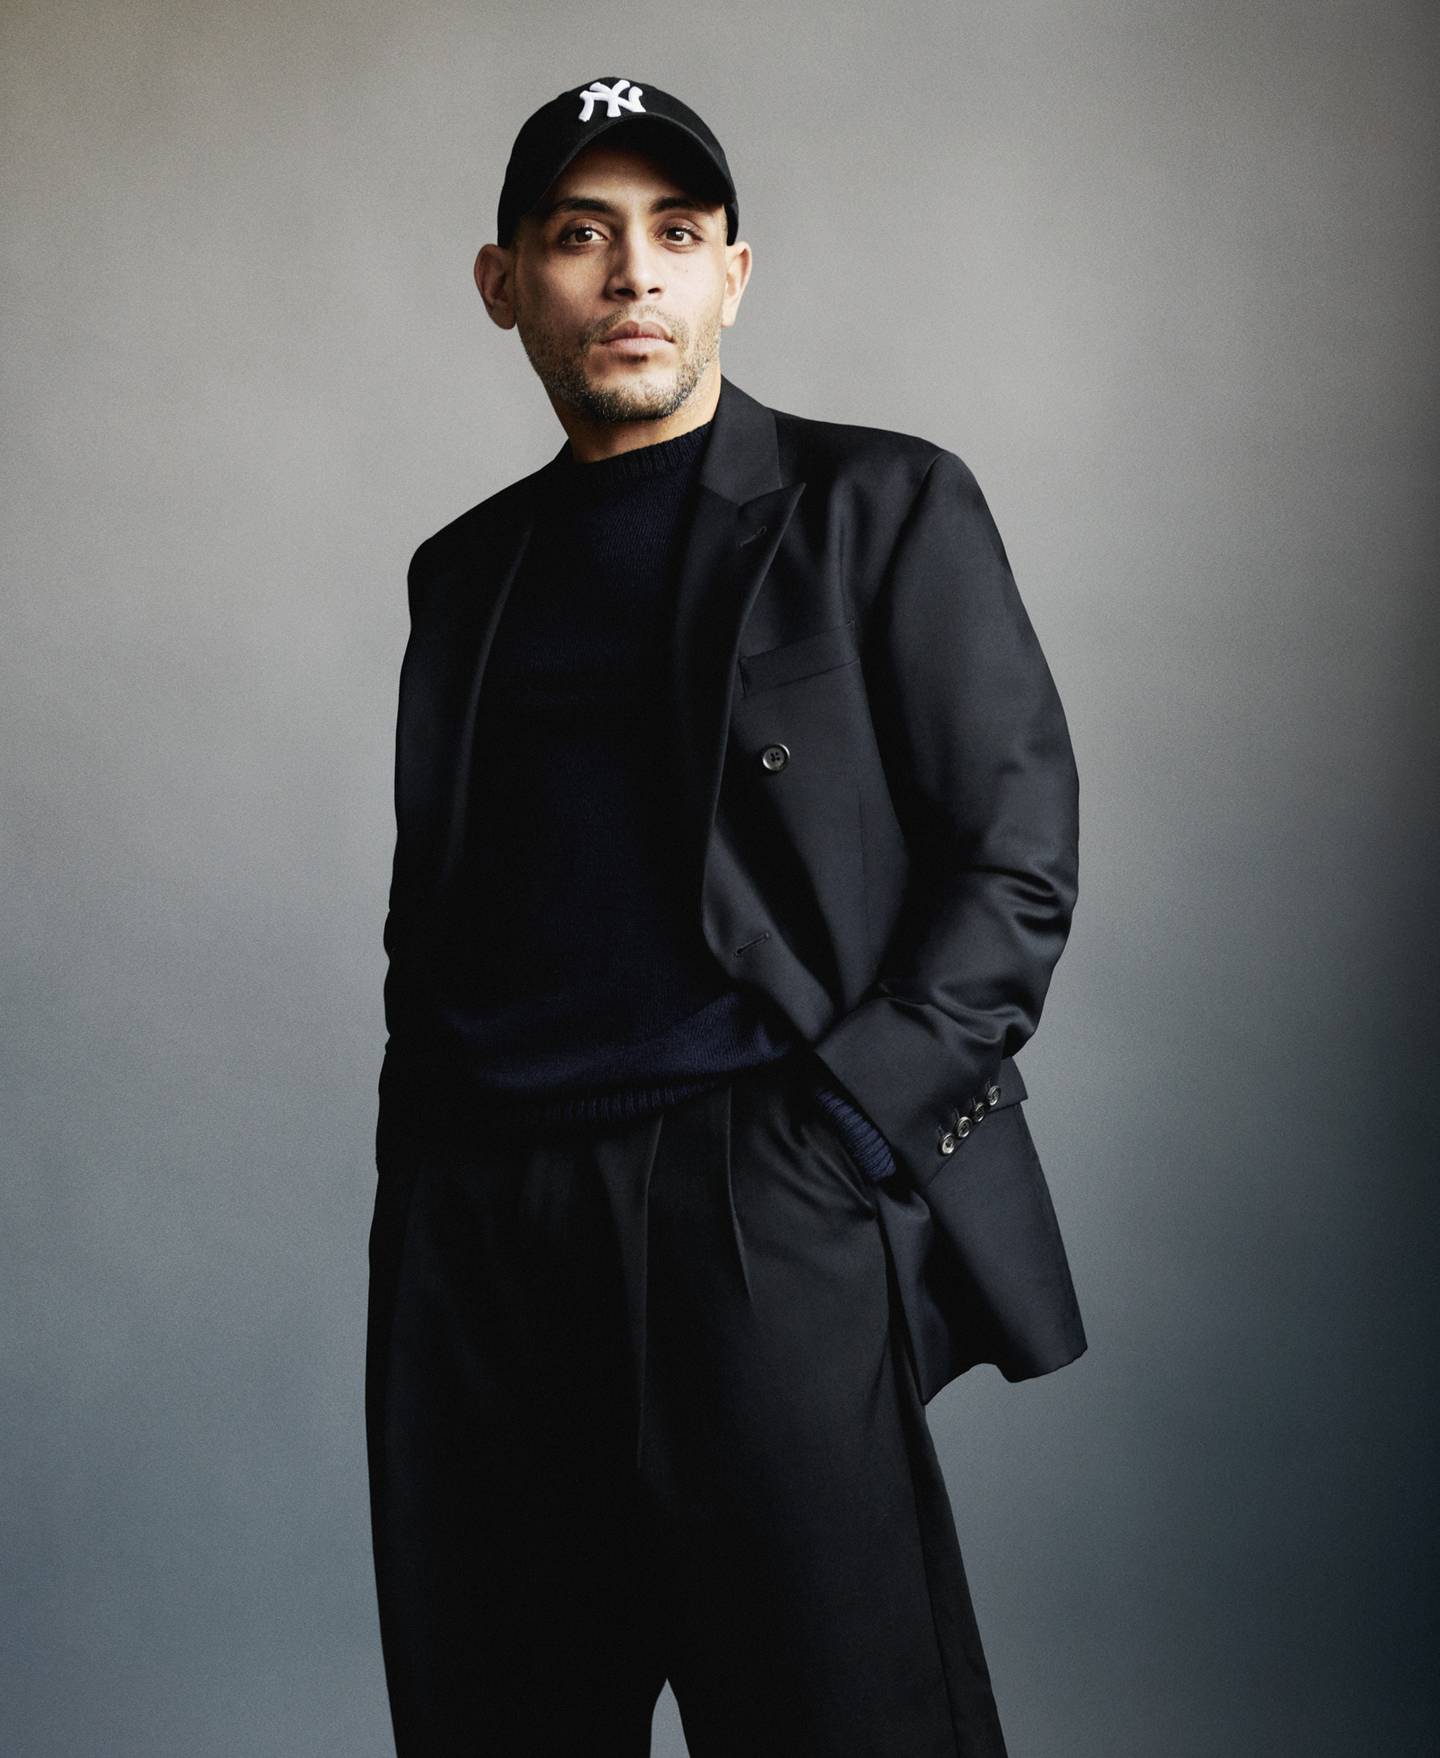 Ahmad Swaid is the new editor-in-chief of GQ Middle East.